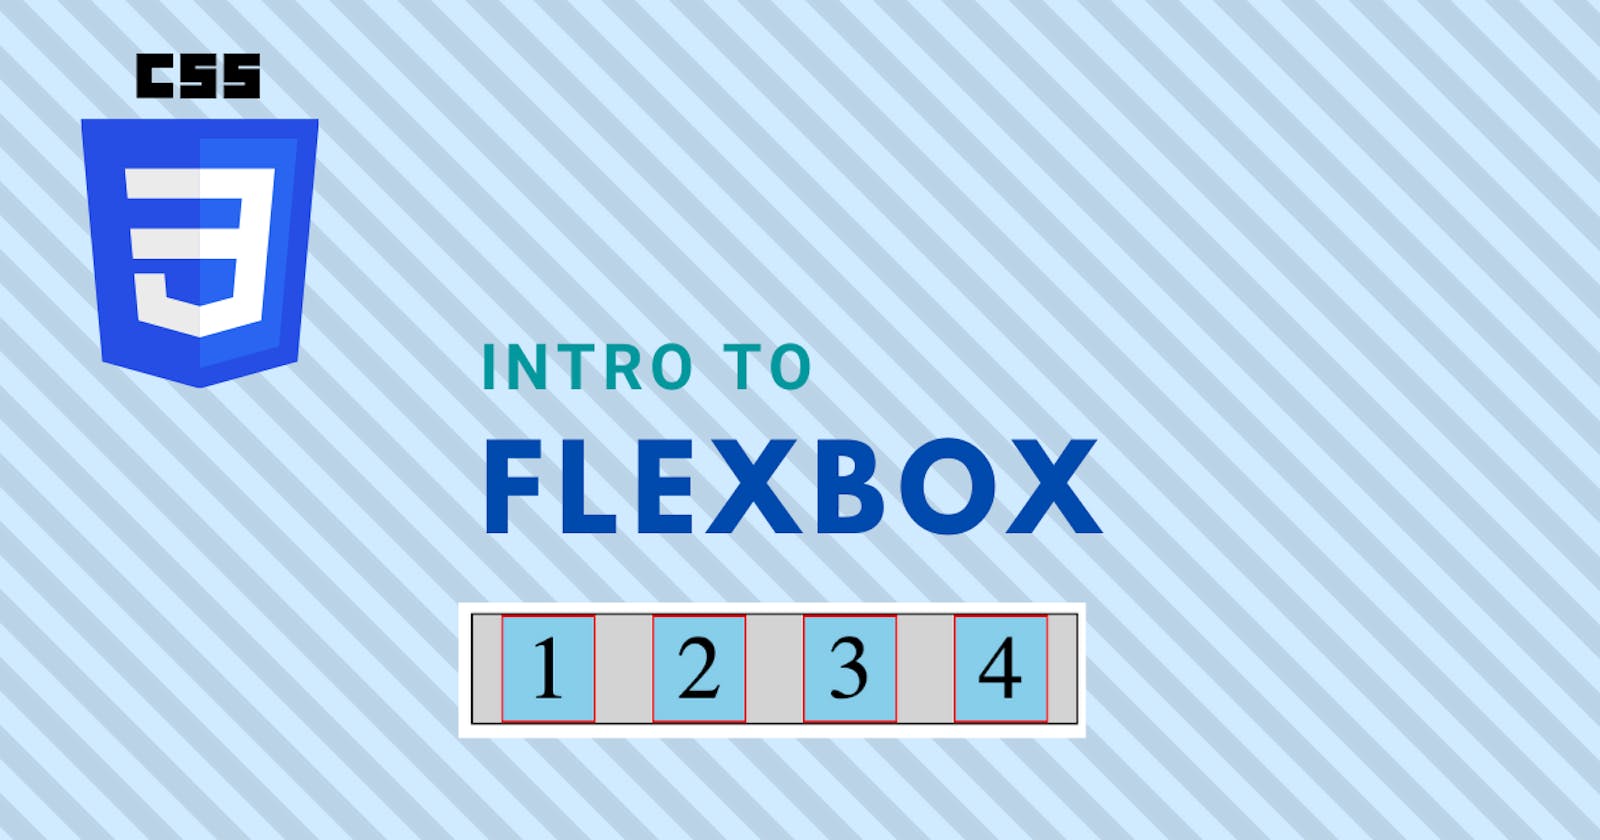 Introduction to Flexbox